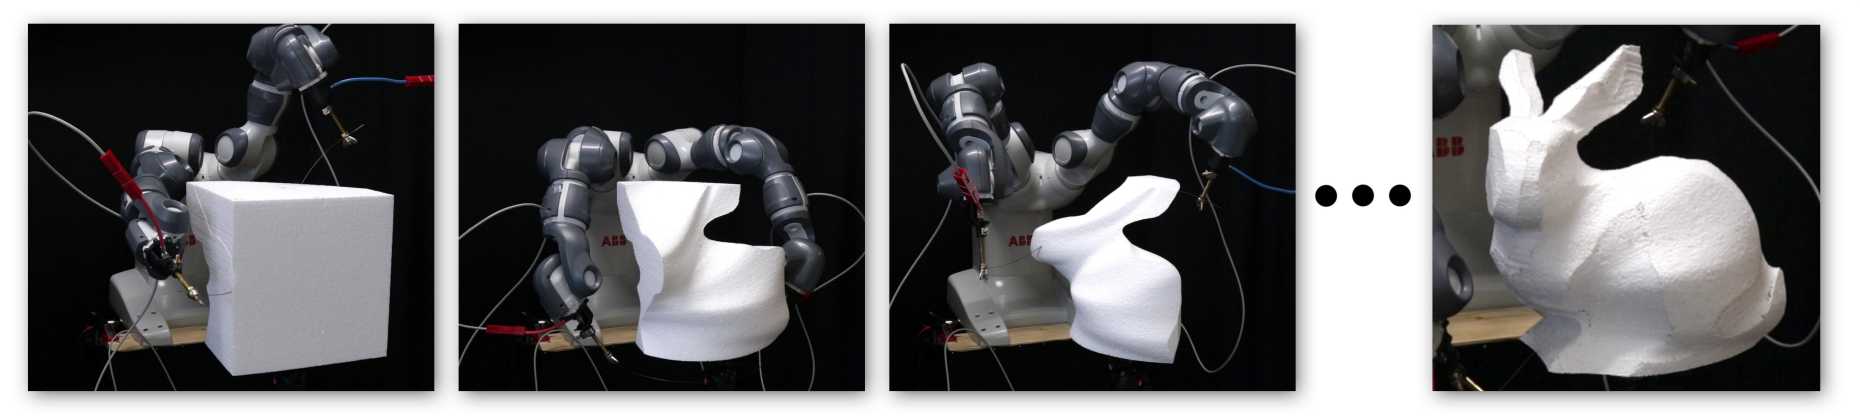 robot at work: showing four of the ten steps of the creation of a bunny